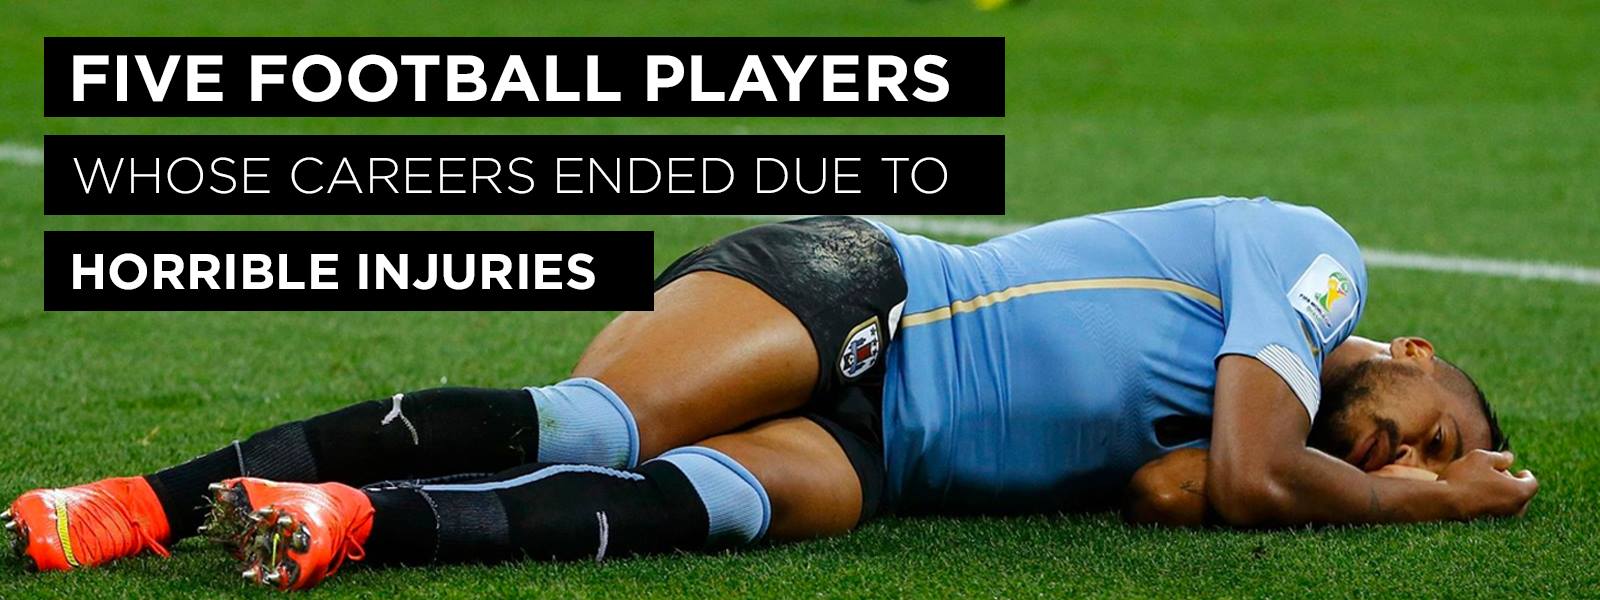 5 Footballers Whose Careers Ended Due To Horrible Injuries